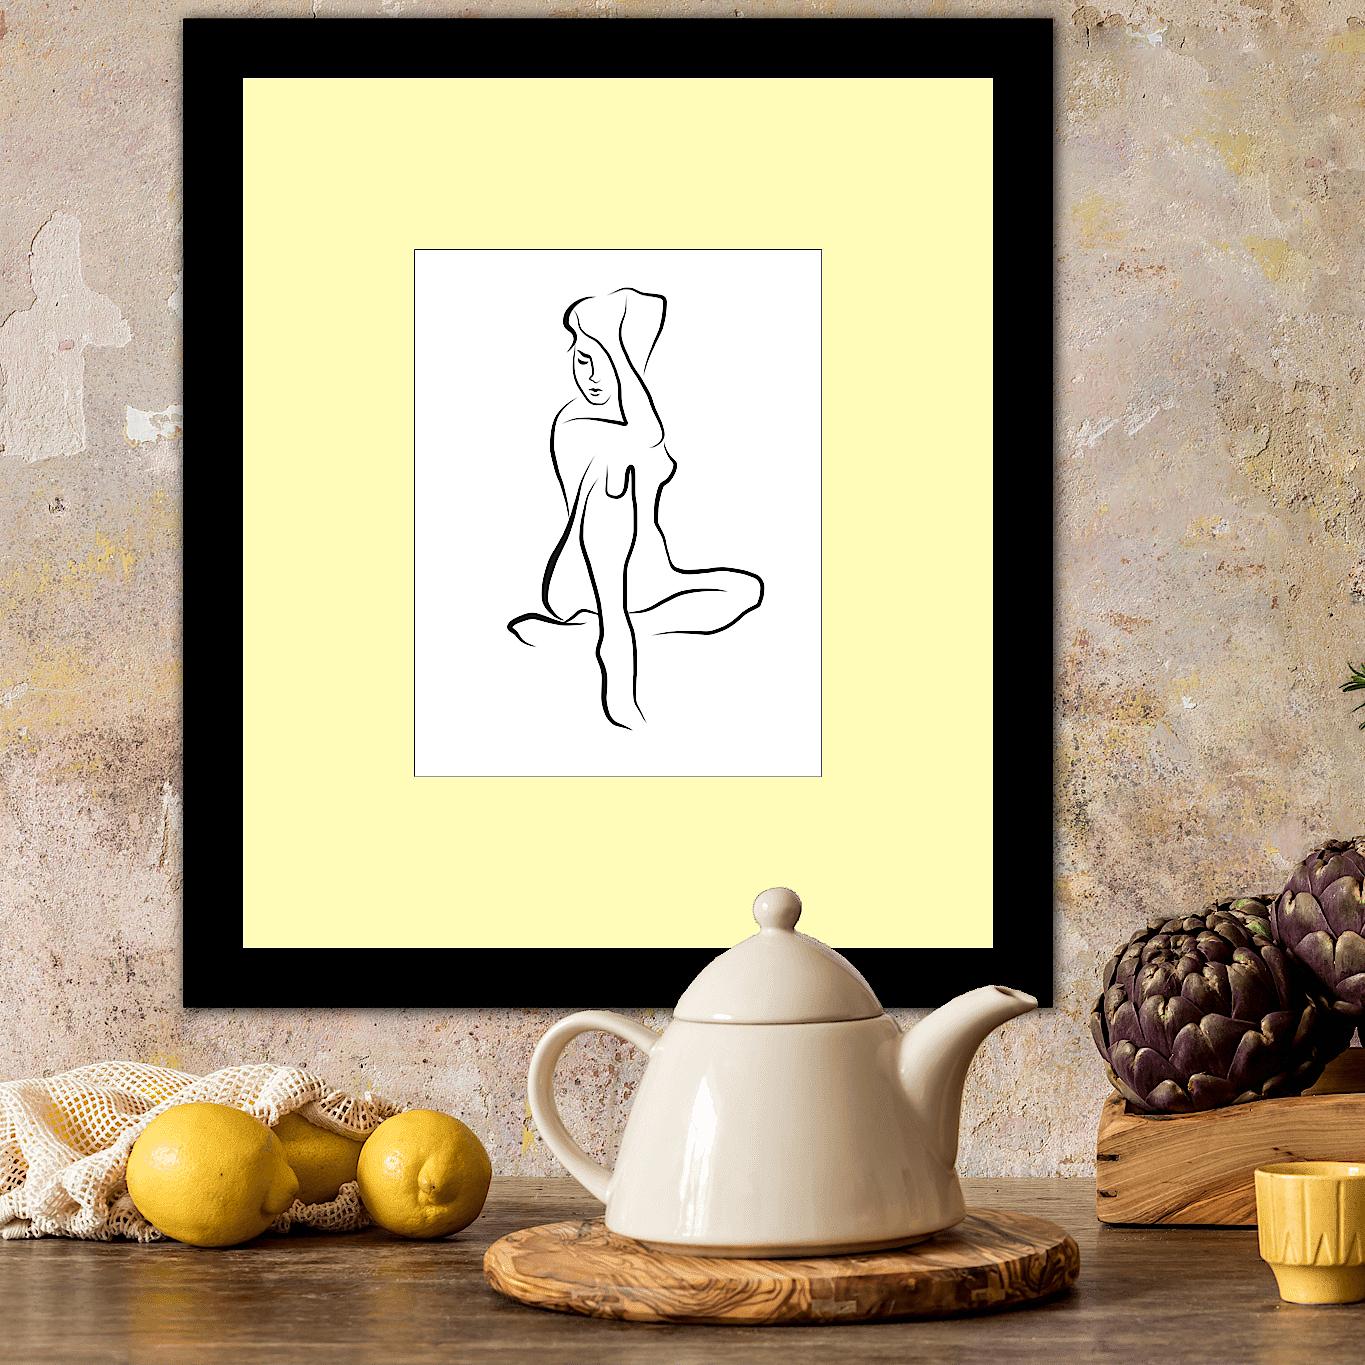 Haiku #41 - Digital Vector Drawing Sitting Female Nude Woman Figure Deep Thought

This is a limited edition (50) digital black & white print of a seated female nude, executed in 17 vector lines. It is part of a series called Haiku, after the style